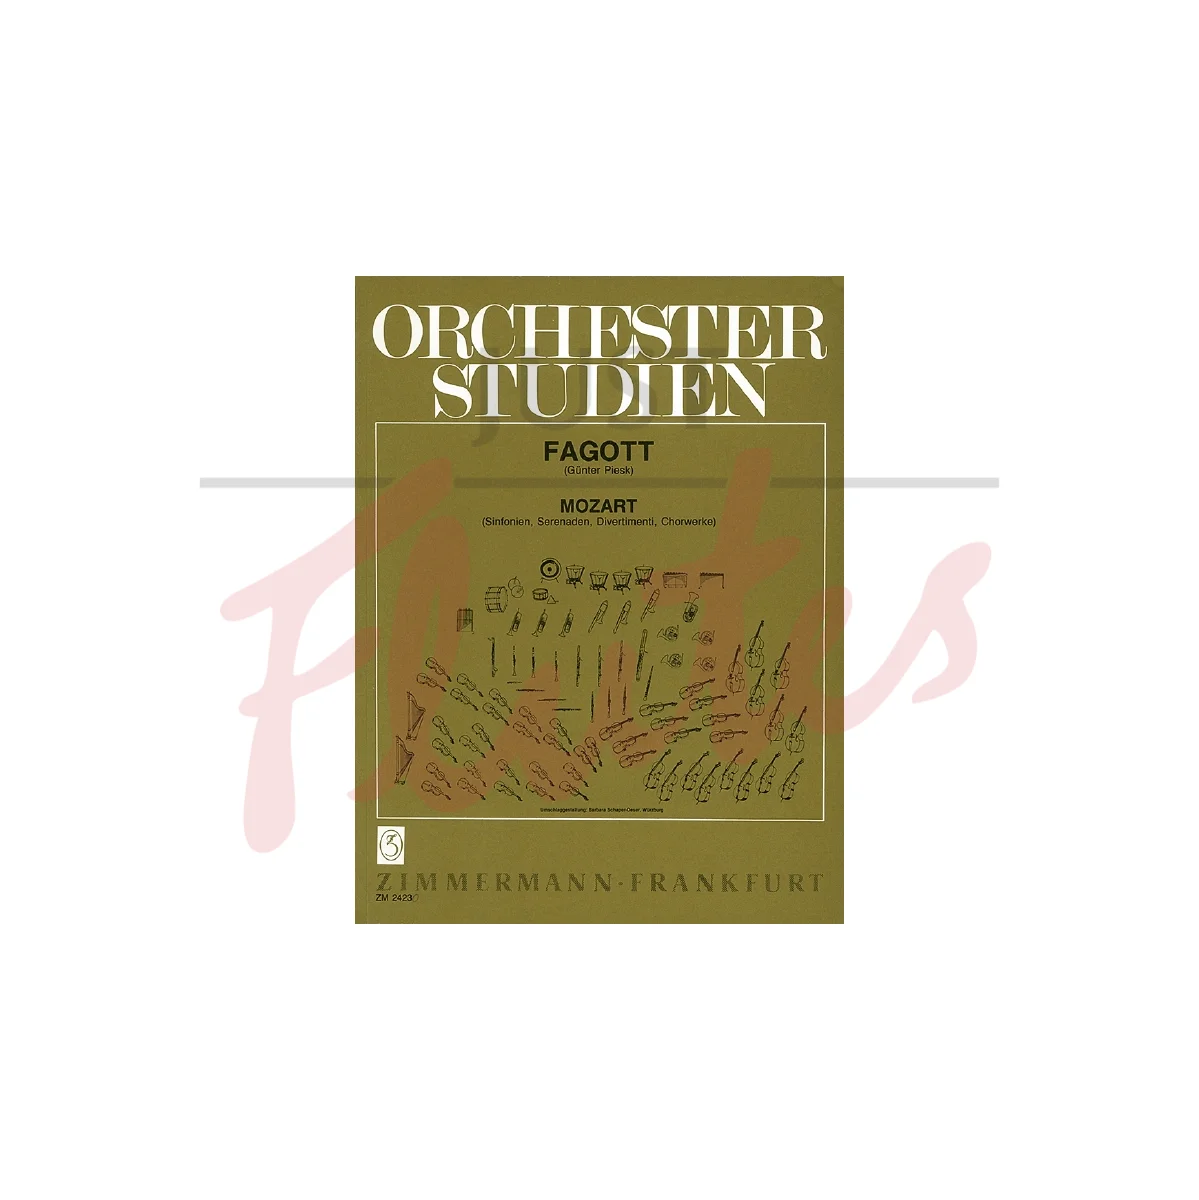 Orchestra Studies for Bassoon - Mozart Symphonies, Serenades, Divertimenti, Choral Works